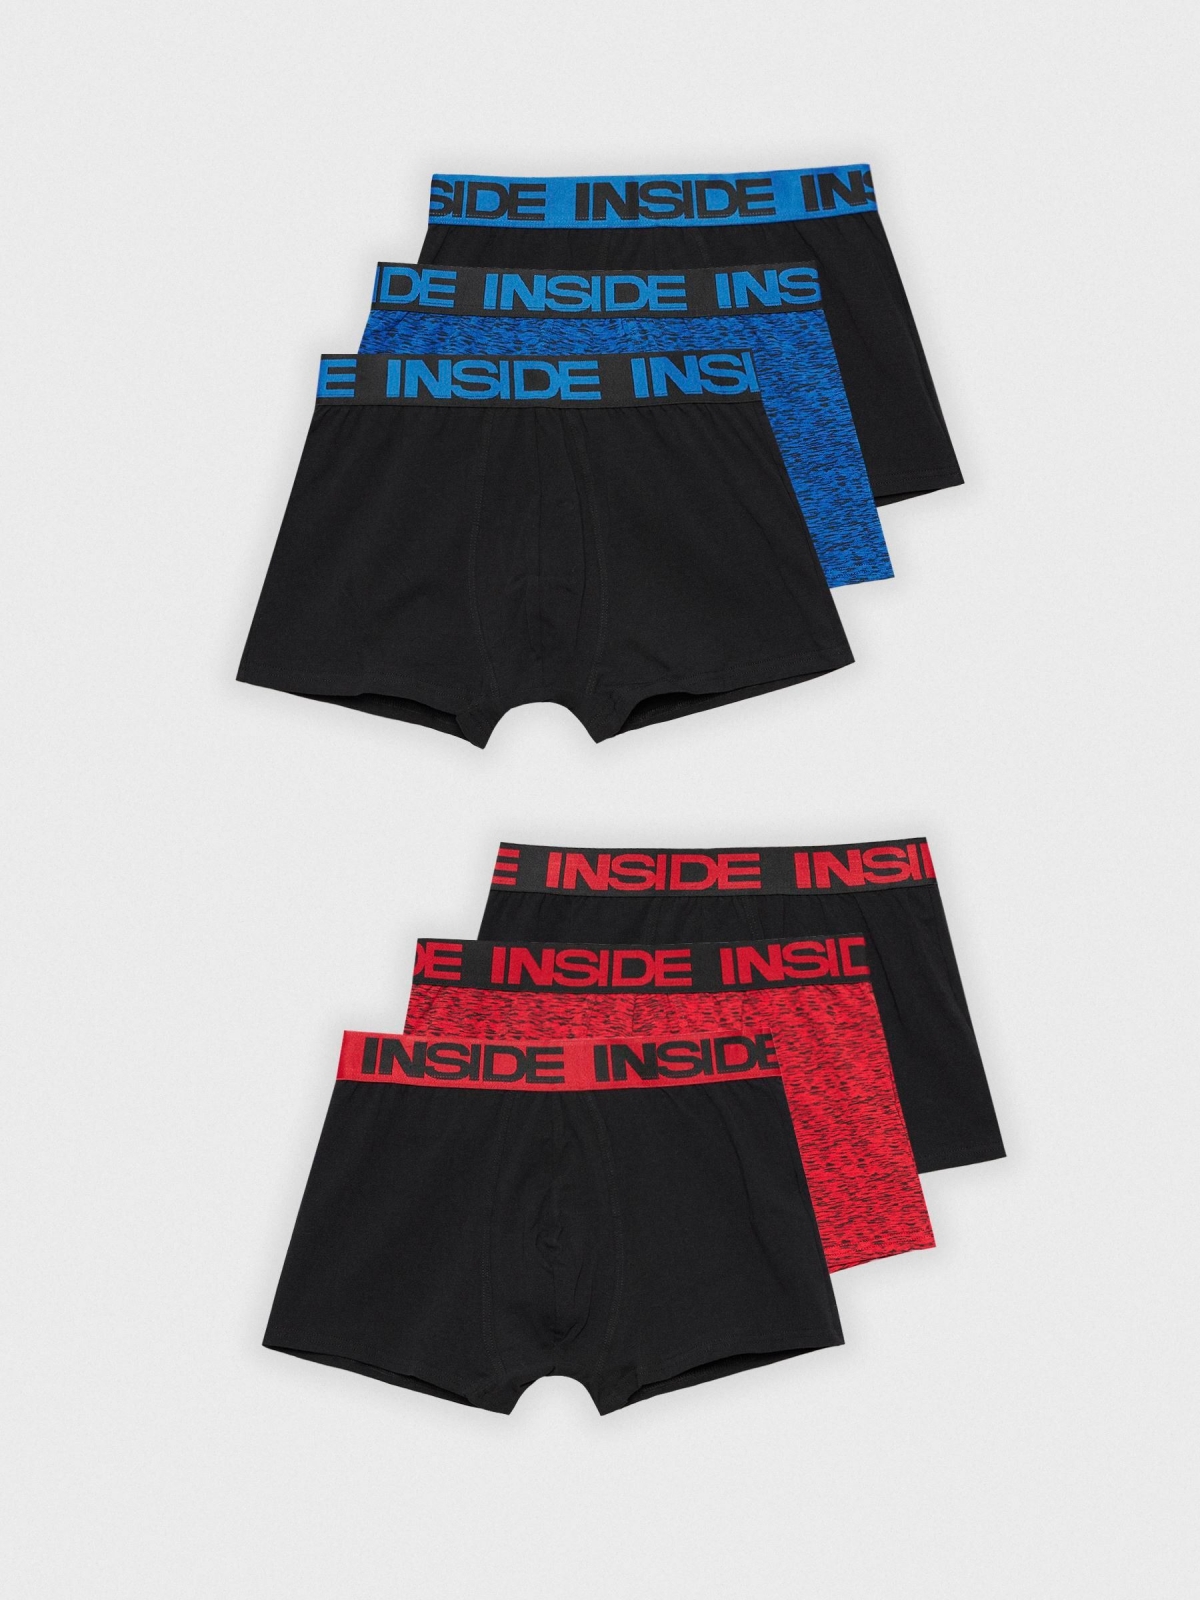 Pack 6 boxers INSIDE con contrastes